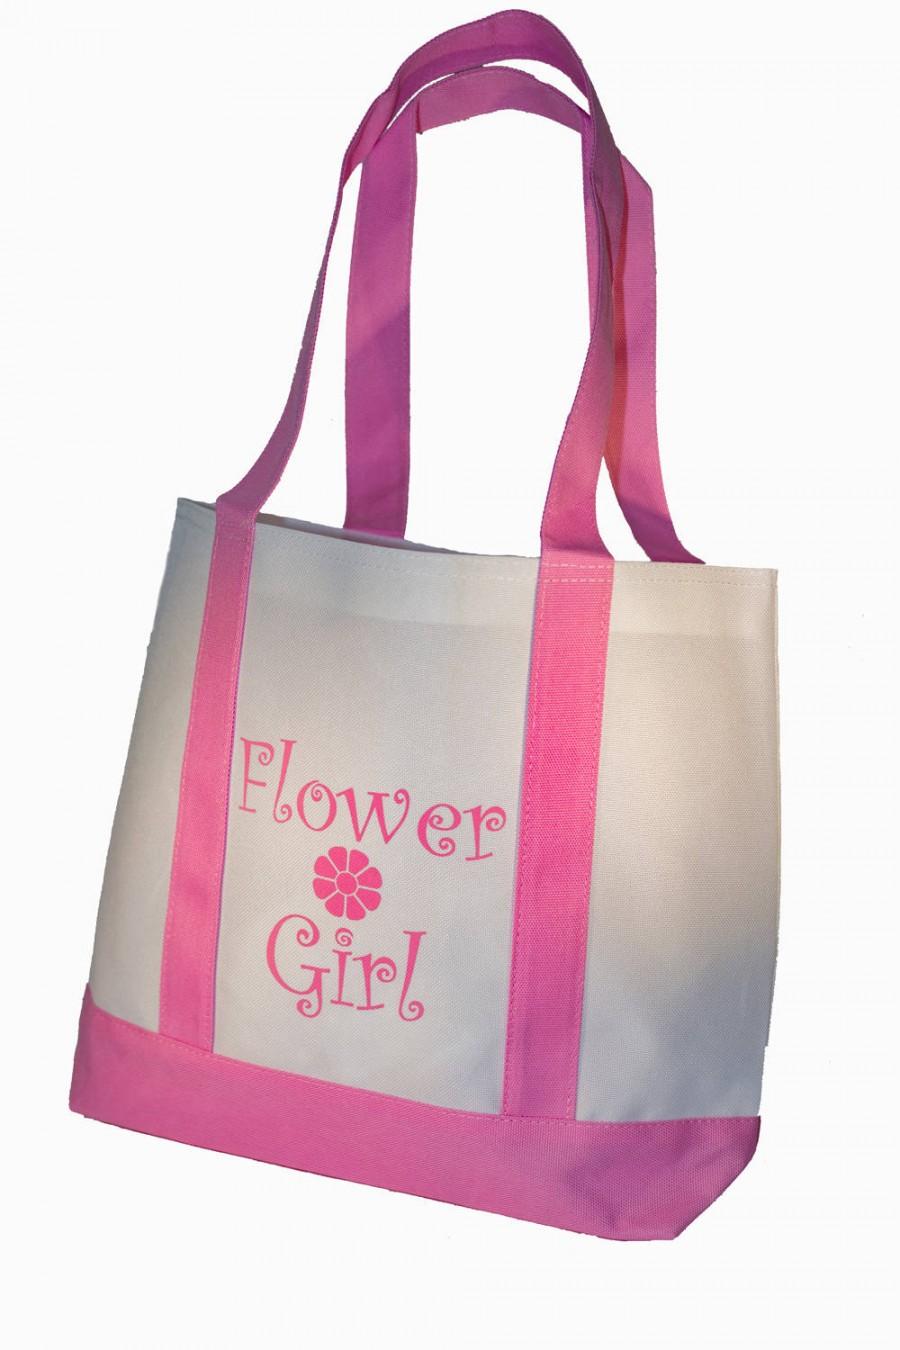 Wedding - Flower Girl Tote Bag with Pink Straps Wedding Flower Girl Gifts Free Shipping